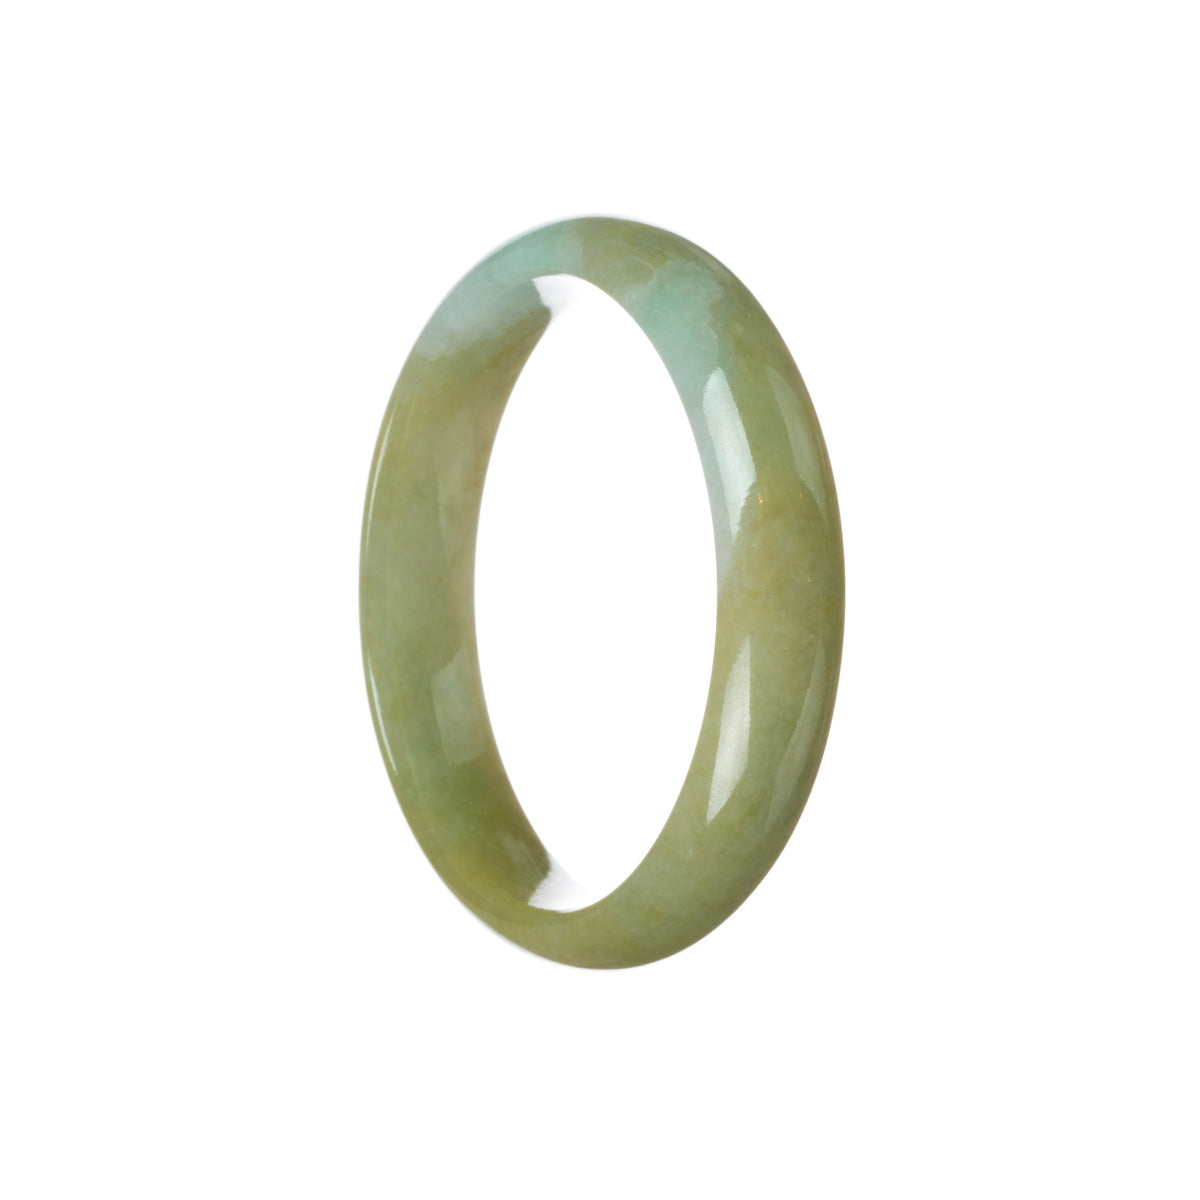 Certified Grade A Brownish olive green with white patch Jadeite Jade Bangle Bracelet - 59mm Half Moon